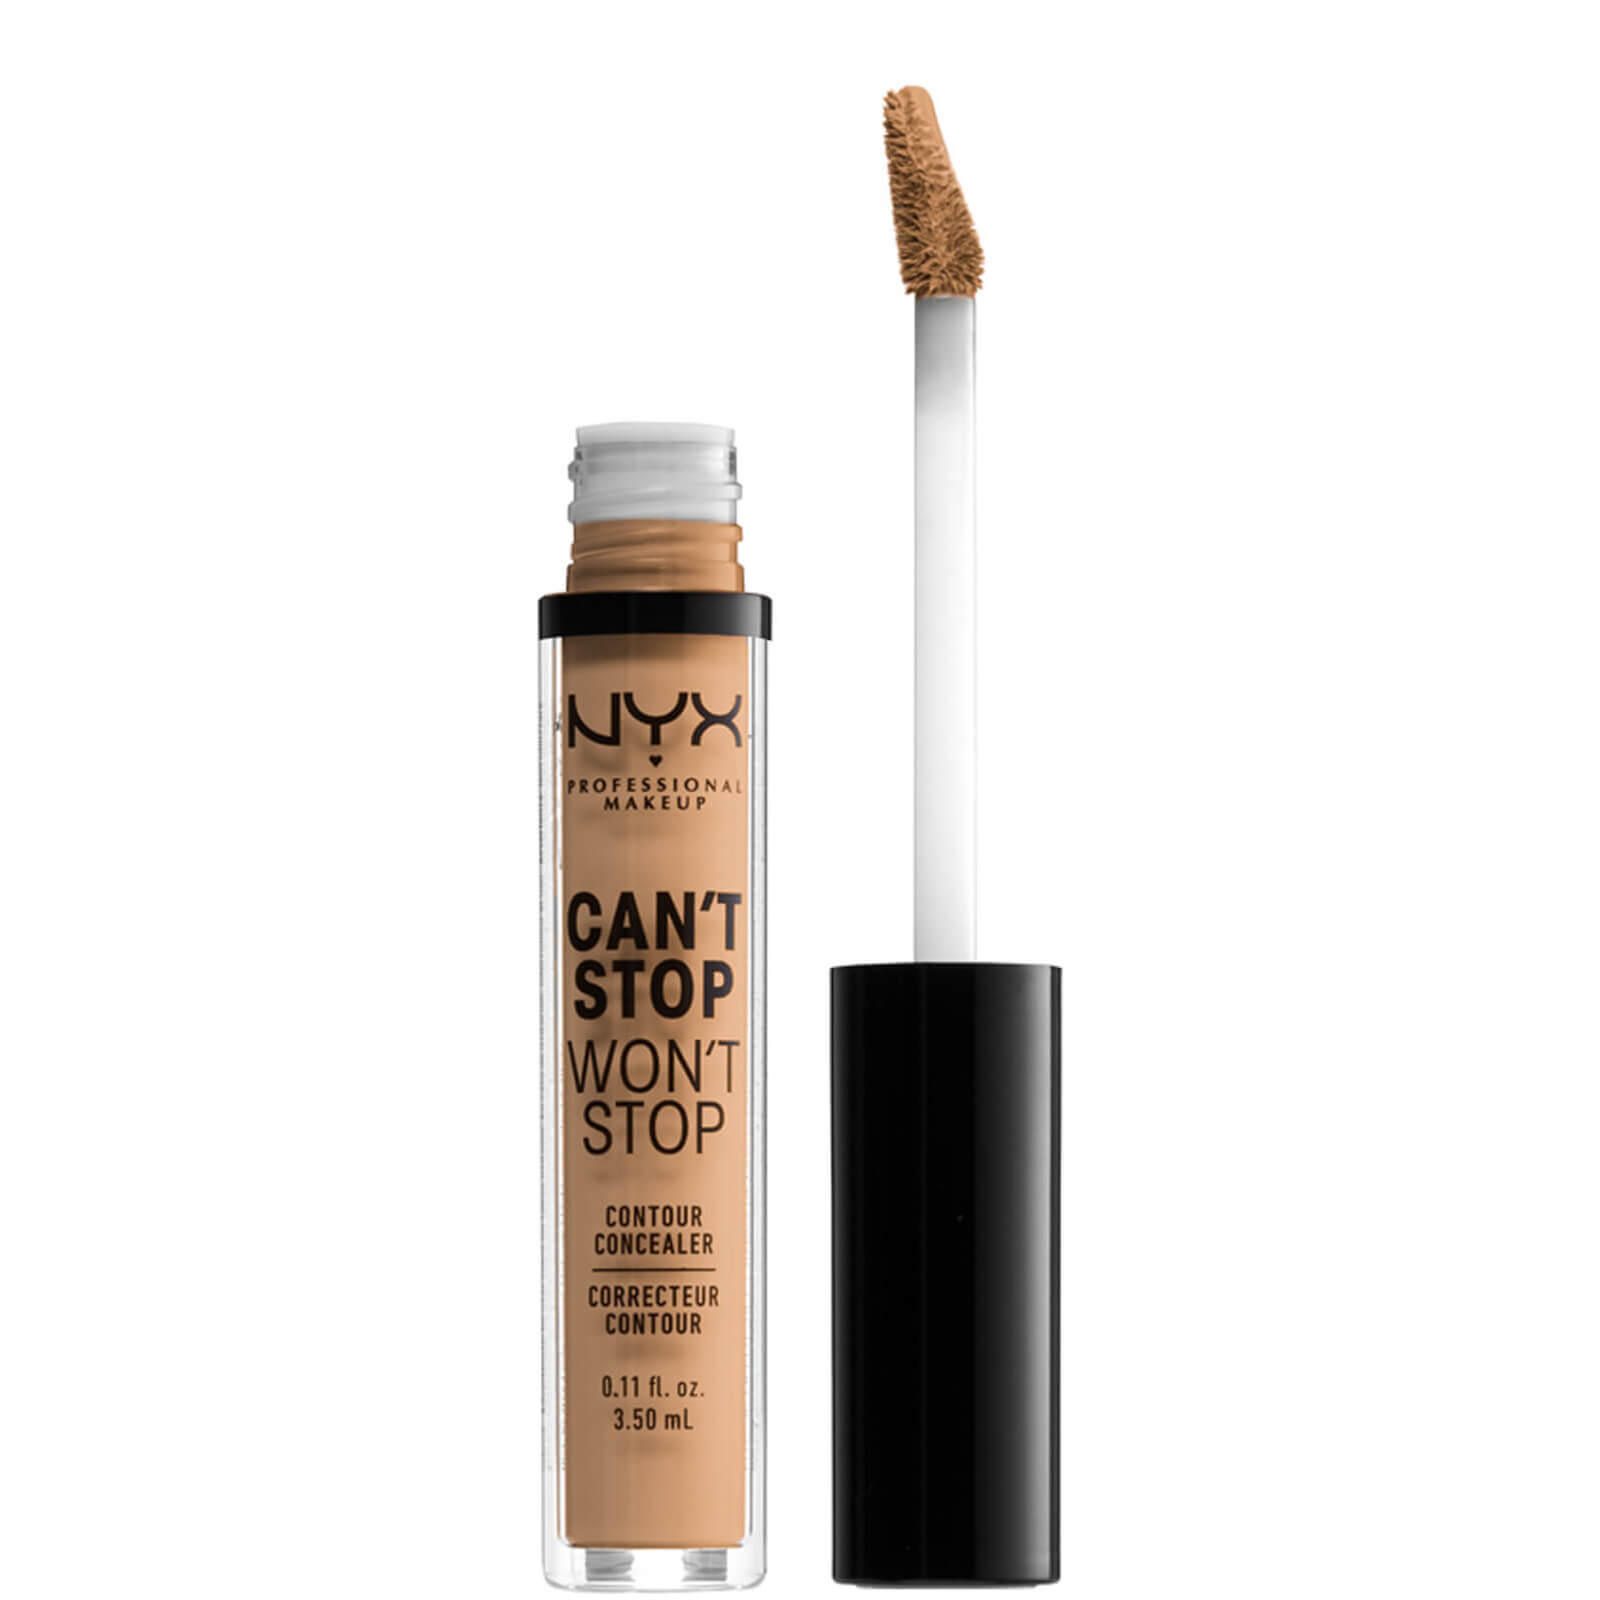 Image of NYX Professional Makeup Can't Stop Won't Stop Contour Concealer (Various Shades) - Soft Beige